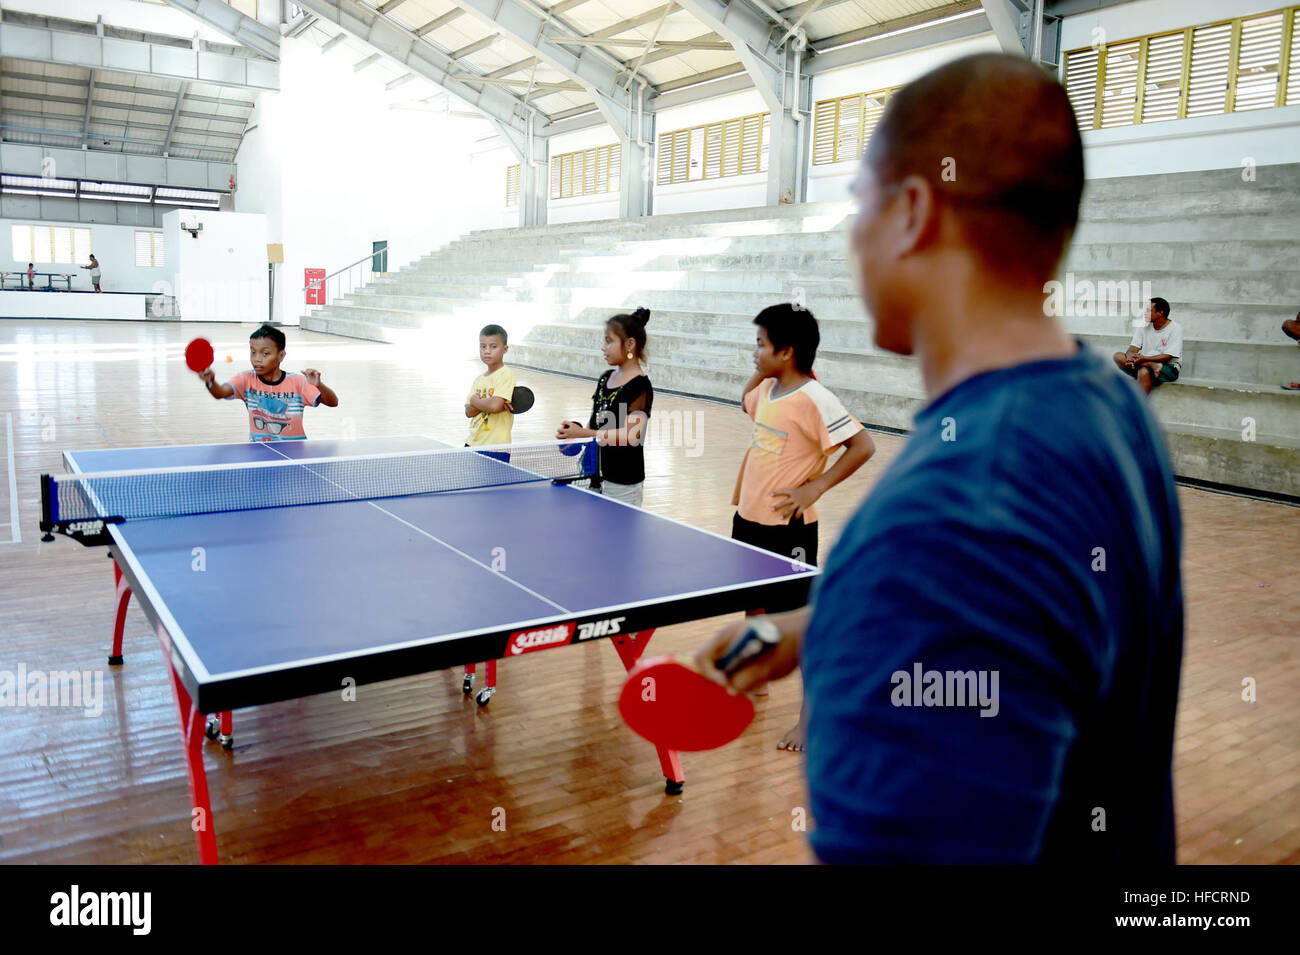 150603-N-HY254-111 TARAWA, Kiribati (June 3, 2015) Boatswain’s Mate 1st Class Kensley Raigeluw, from Honolulu Hawaii and currently assigned to Coast Guard District 14, plays a game of table tennis with I-Kiribati boy at the Betio Sports Complex during Pacific Partnership 2015.  Now in its tenth iteration, Pacific Partnership is the largest annual multilateral humanitarian assistance and disaster relief preparedness mission conducted in the Indio-Asia-Pacific region. While training for crisis conditions, Pacific Partnership missions have provided medical care to approximately 270,000 patients a Stock Photo